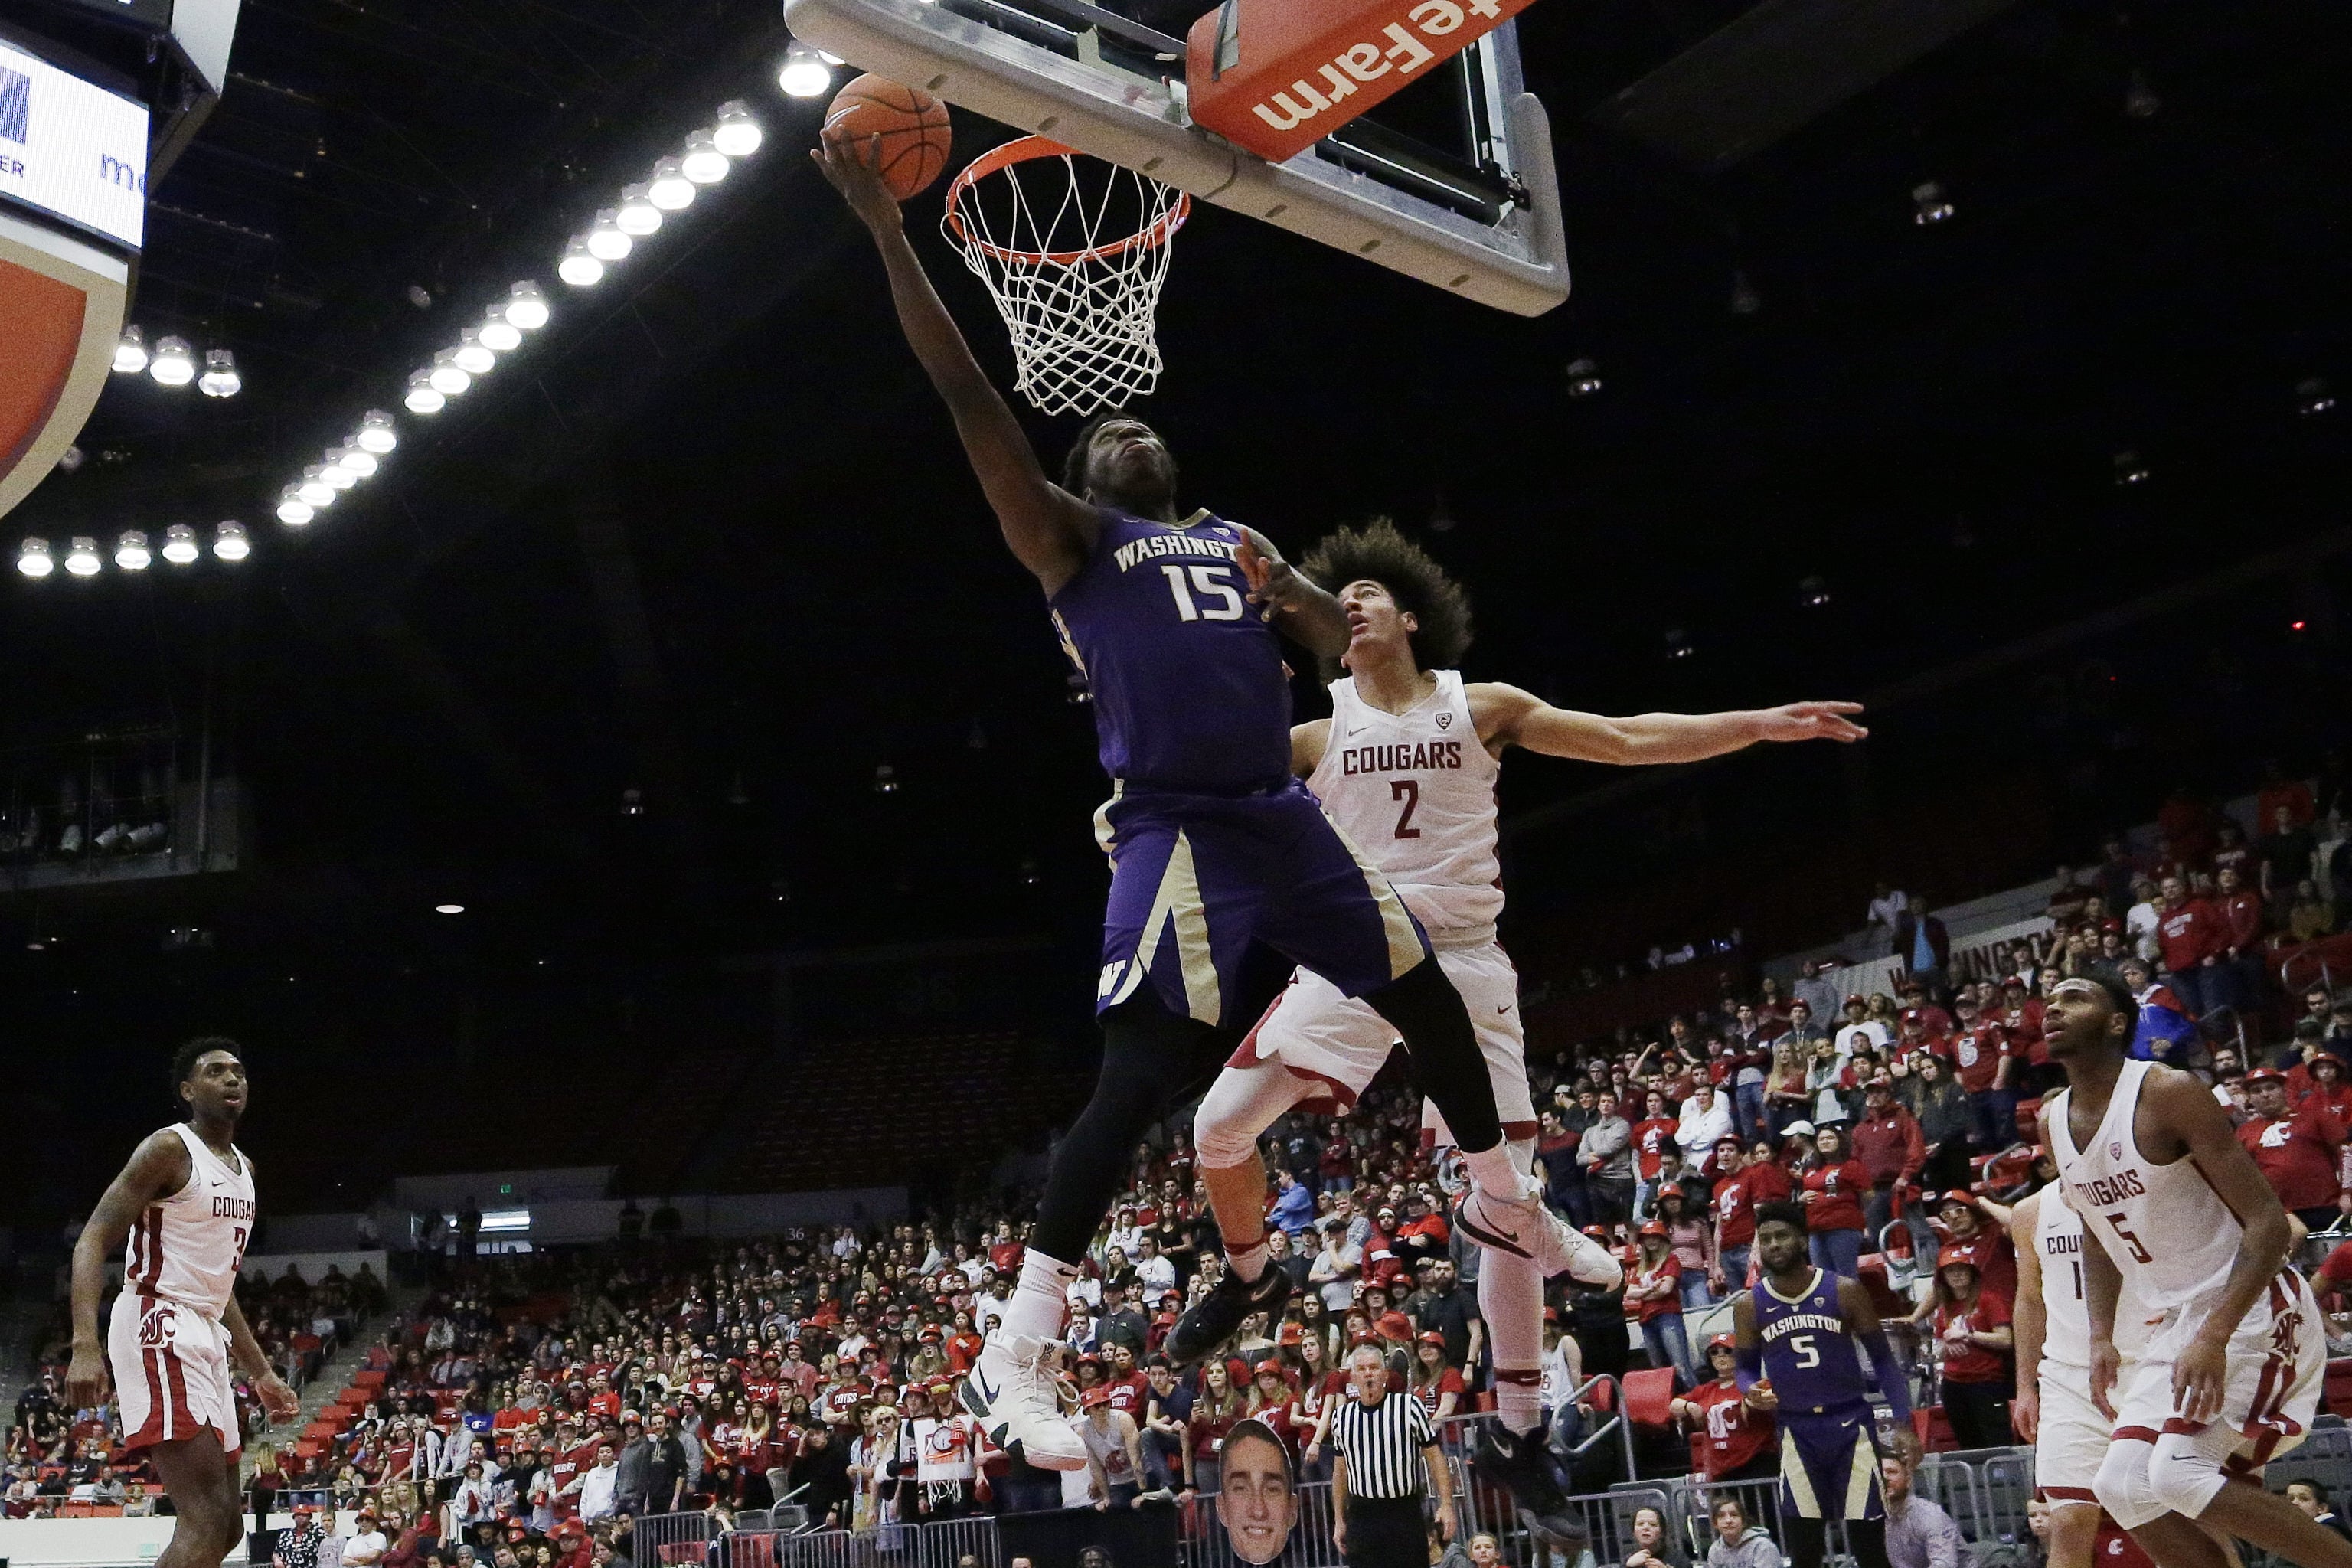 Washington forward Noah Dickerson (15) shoots in front of Washington State forward CJ Elleby (2) during the second half of an NCAA college basketball game in Pullman, Wash., Saturday, Feb. 16, 2019.